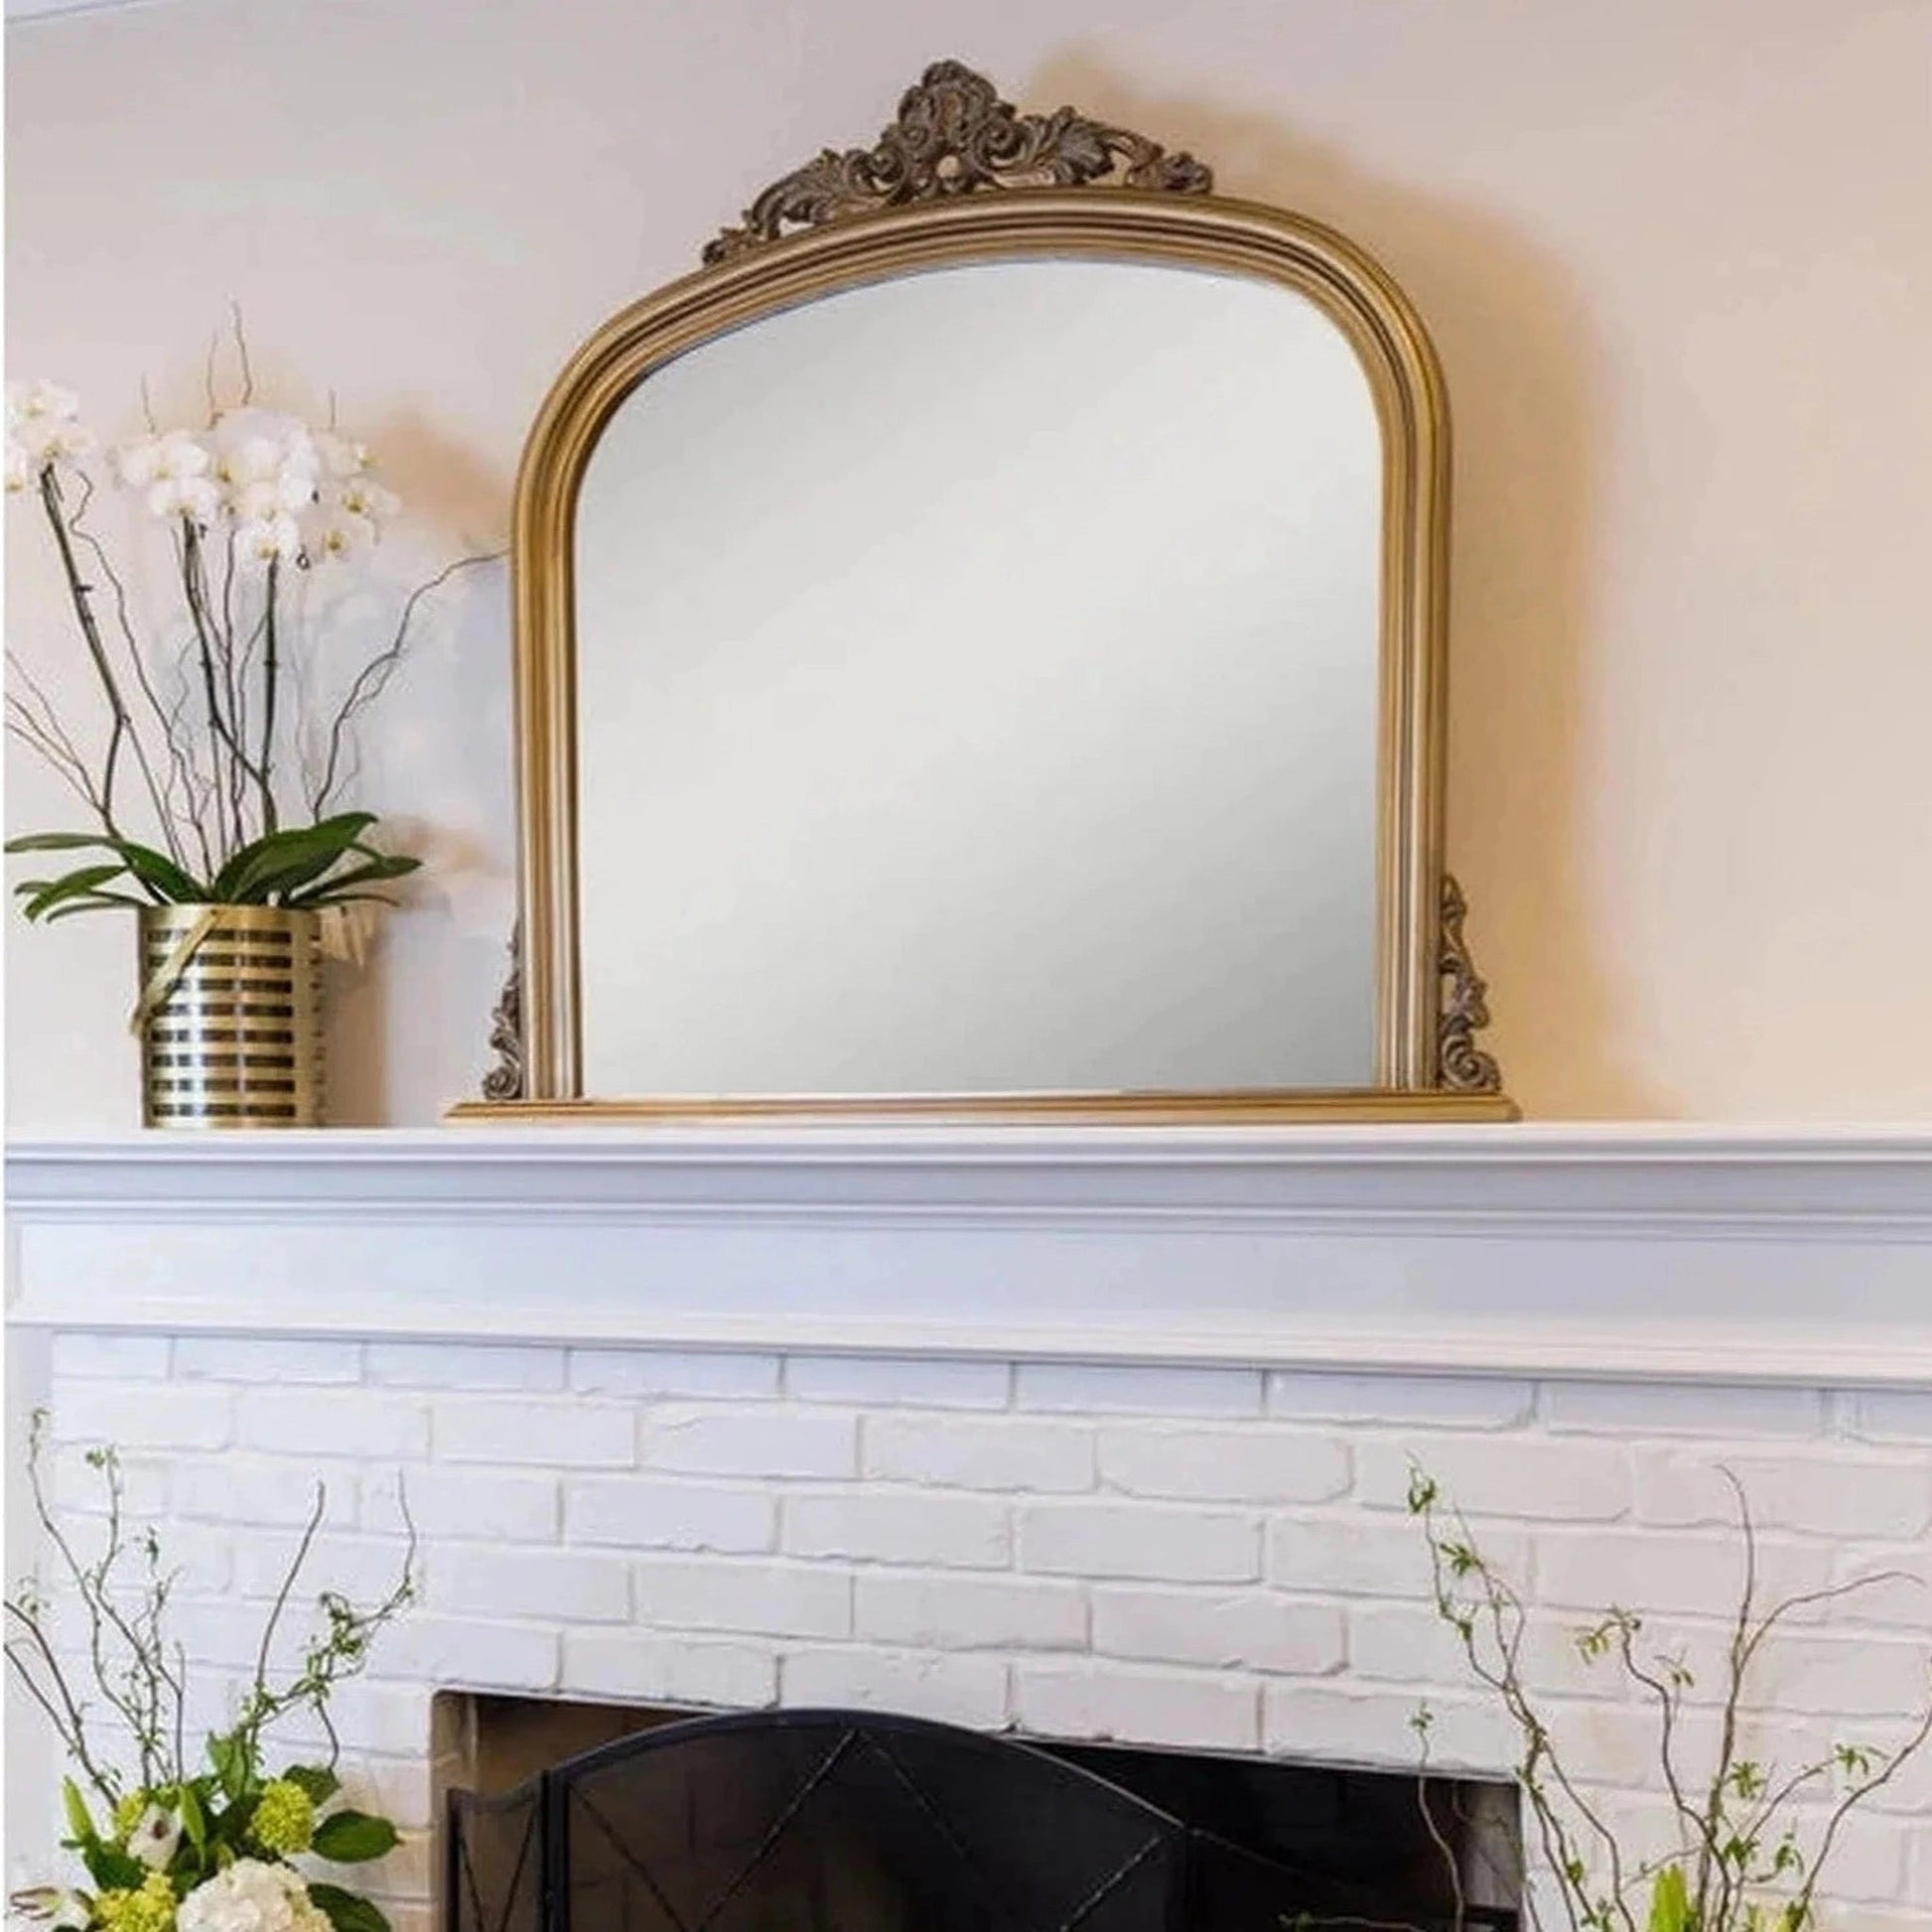 SBC Decor Amarone 39" x 44" Wall-Mounted Wood Frame Dresser Mirror In Antique Gold Finish